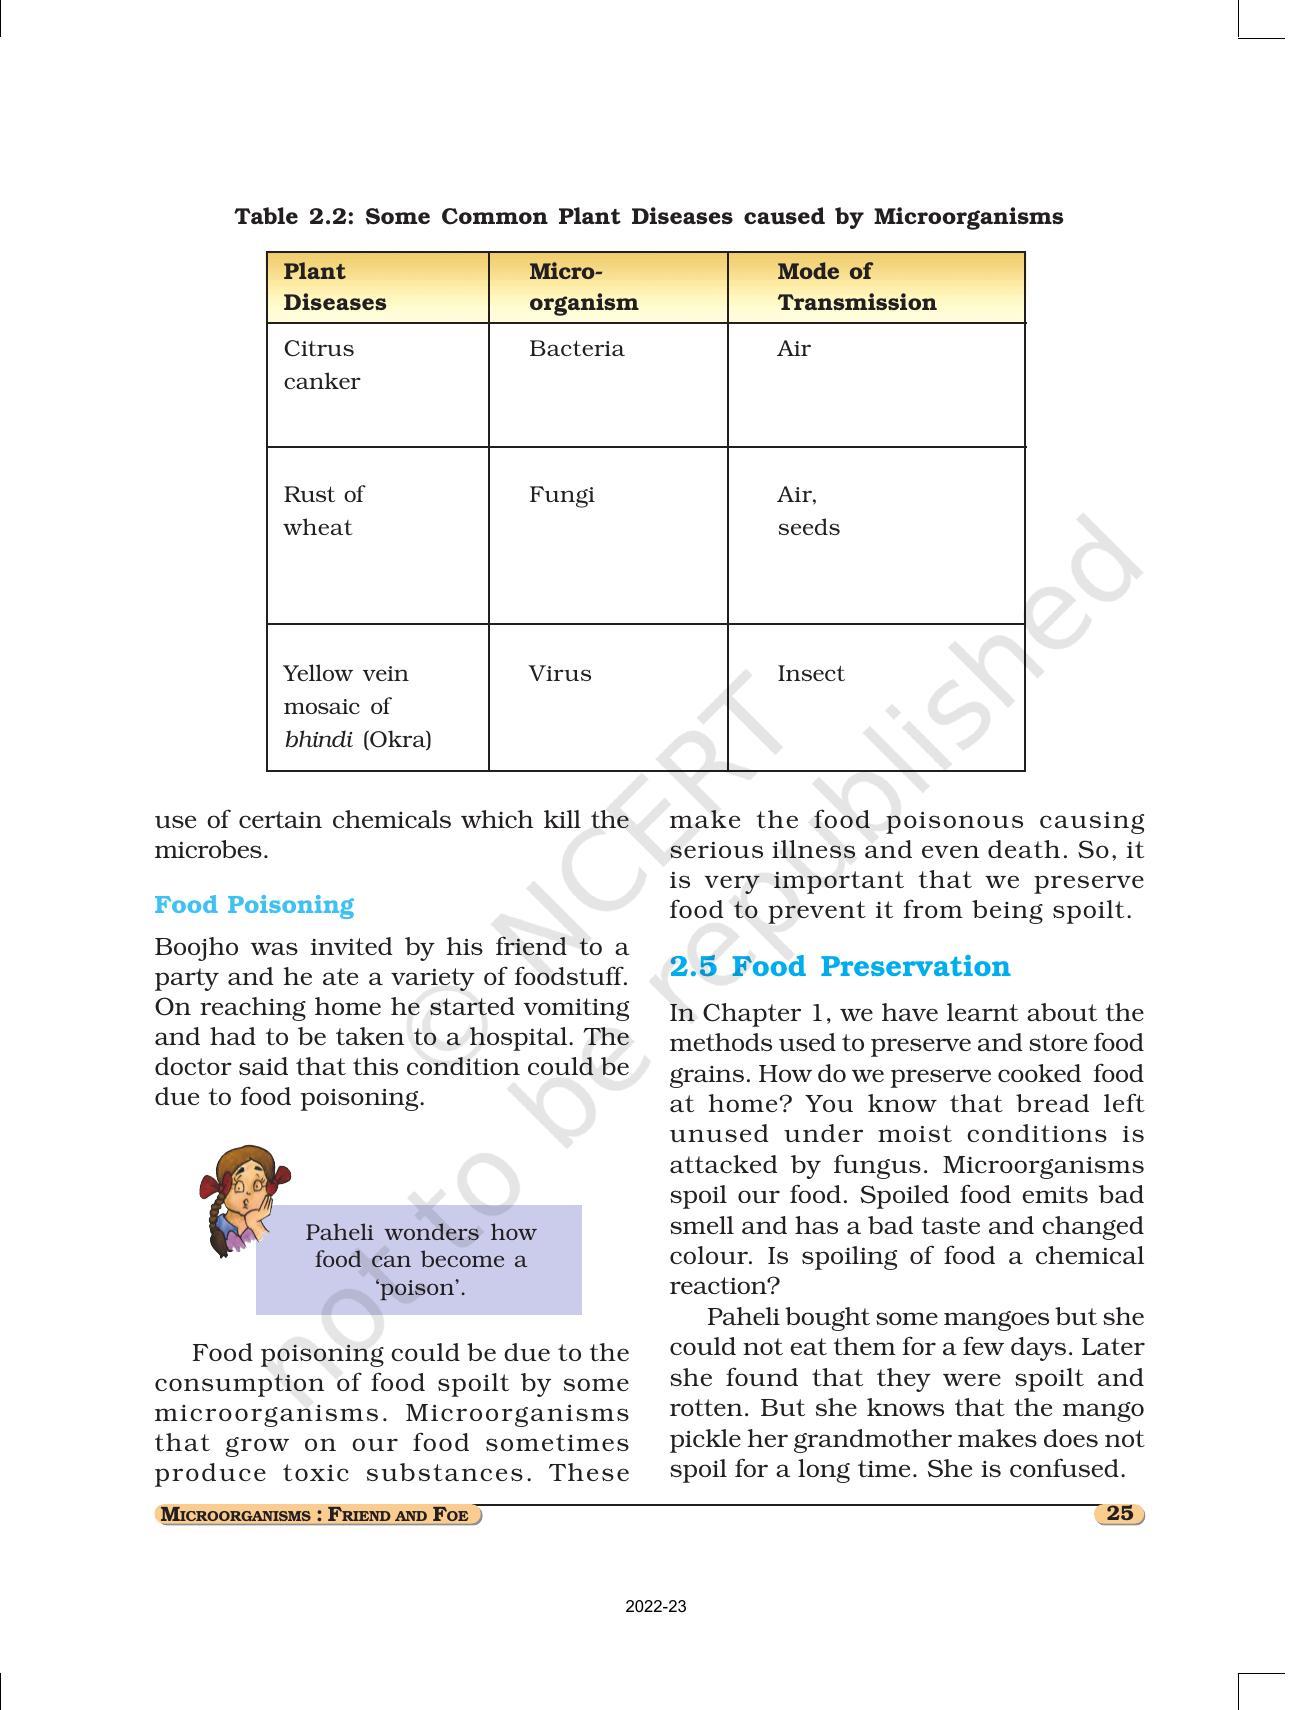 NCERT Book for Class 8 Science Chapter 2 Microorganisms: Friend and Foe - Page 9